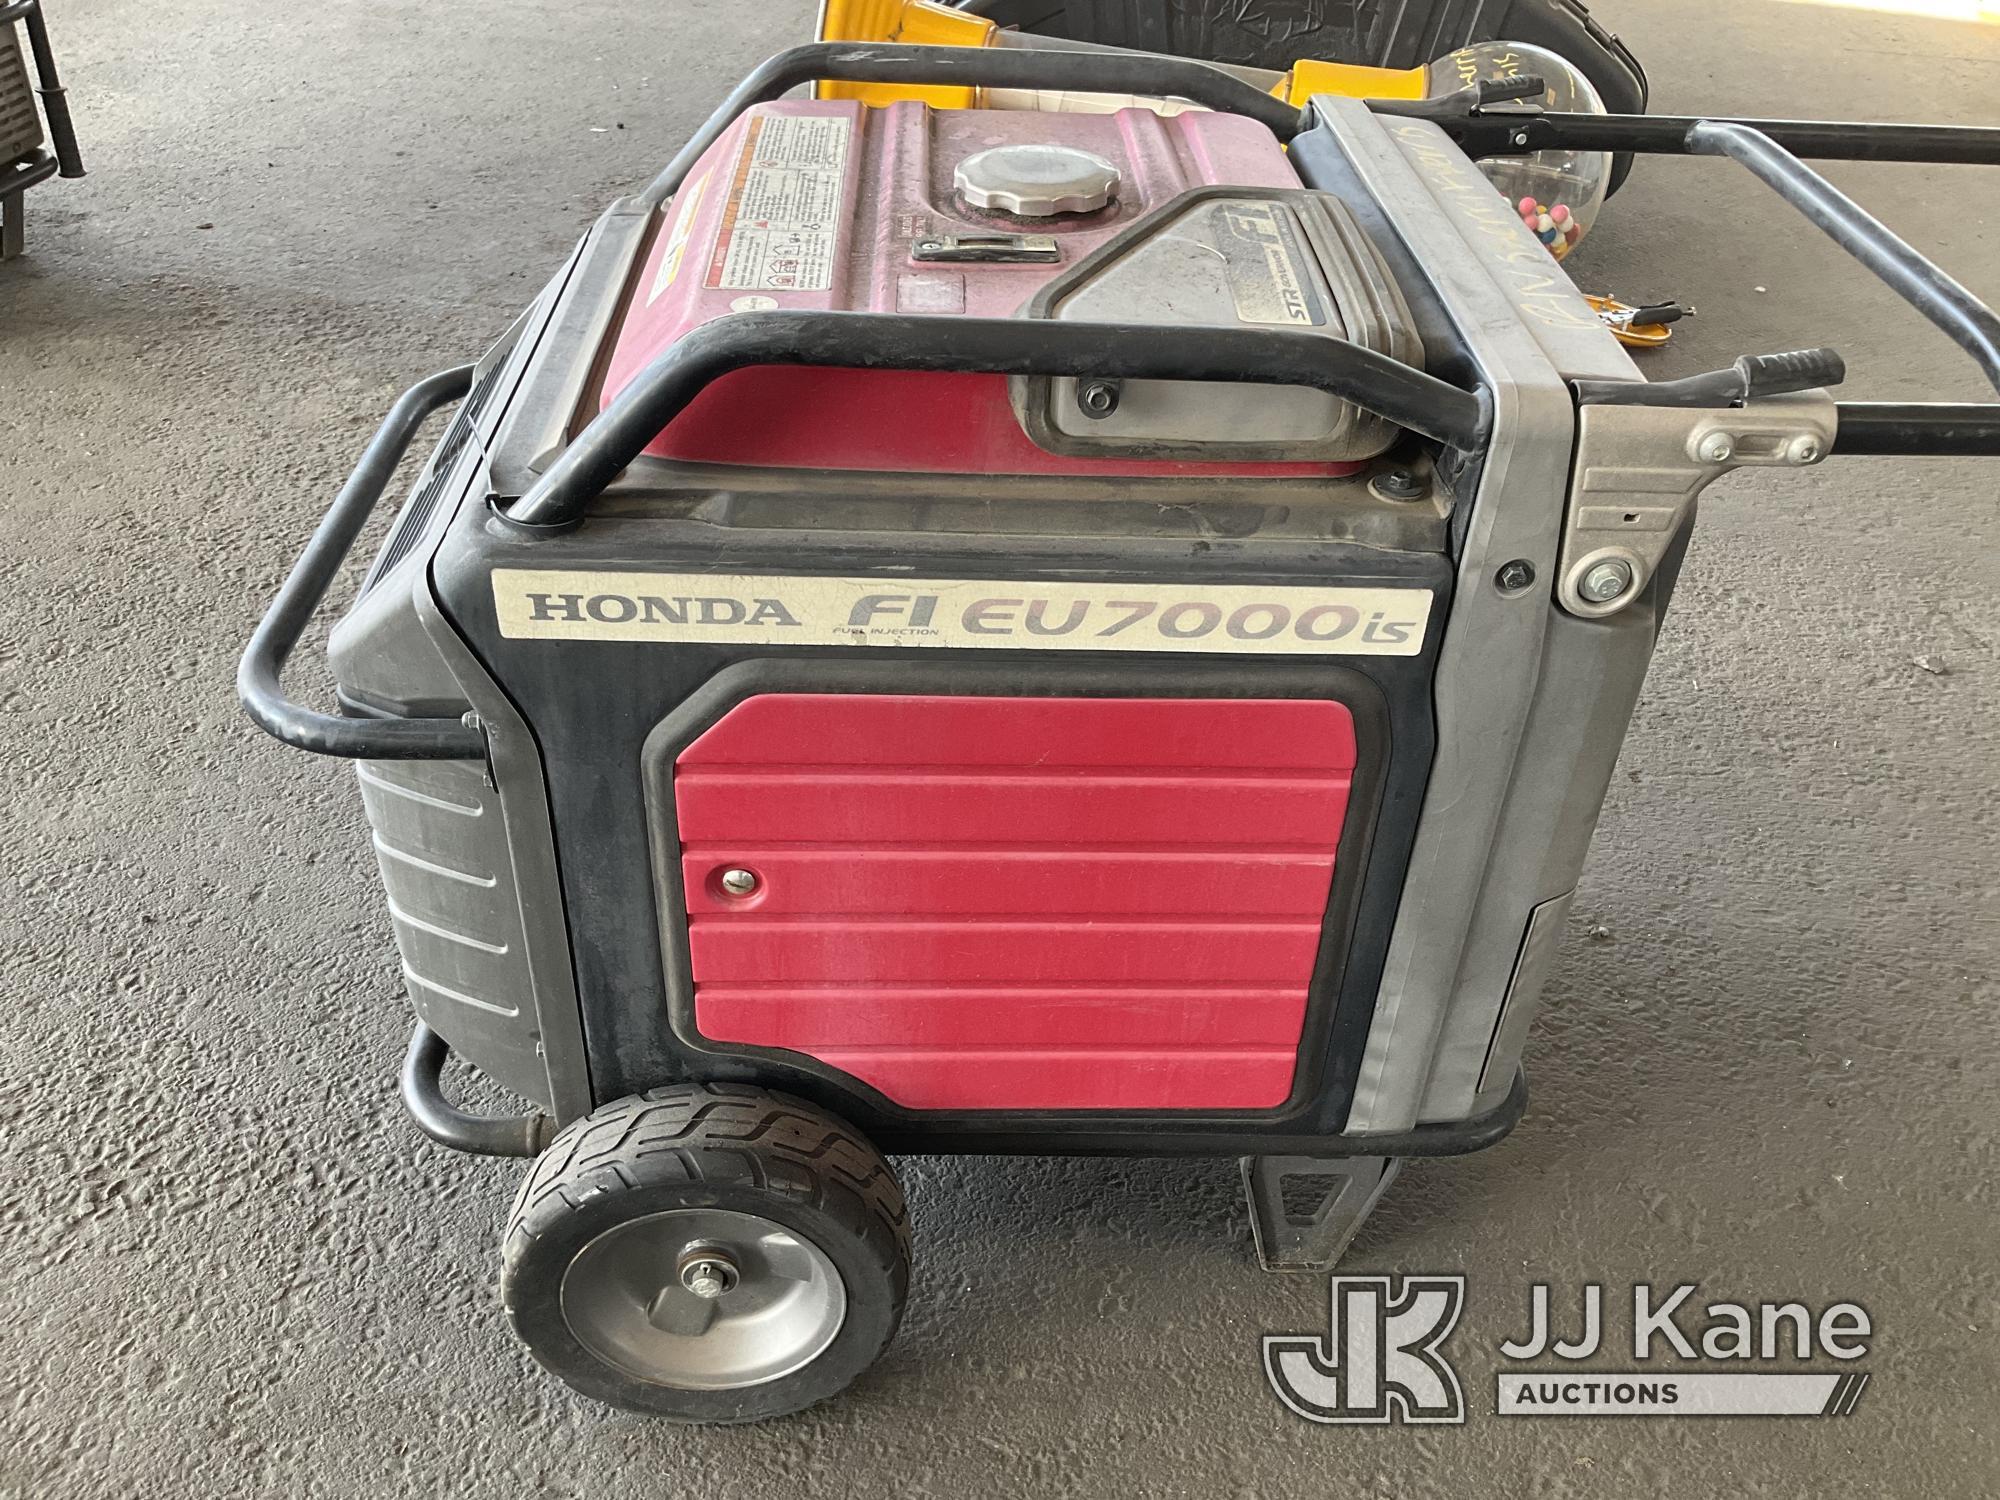 (Jurupa Valley, CA) Honda EU7000is Generator (Used) NOTE: This unit is being sold AS IS/WHERE IS via